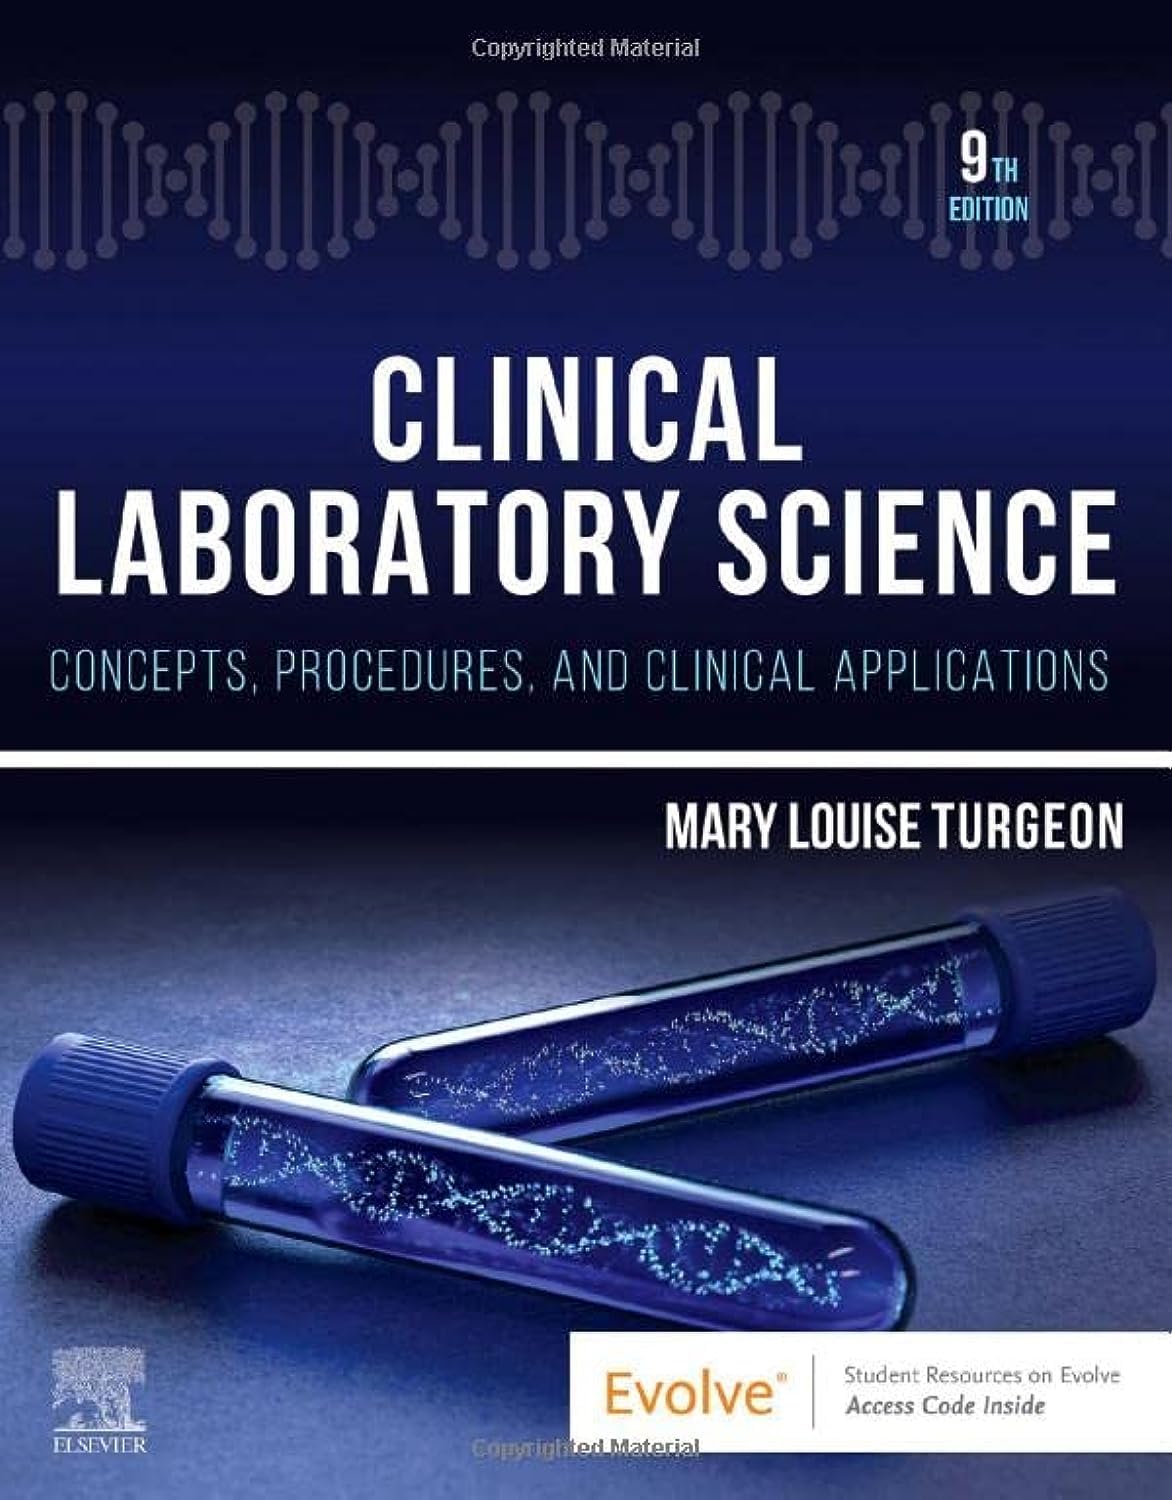 Clinical Laboratory Science: Concepts, Procedures, and Clinical Applications, 9th Edition by Mary Louise Turgeon EdD MLS(ASCP)CM